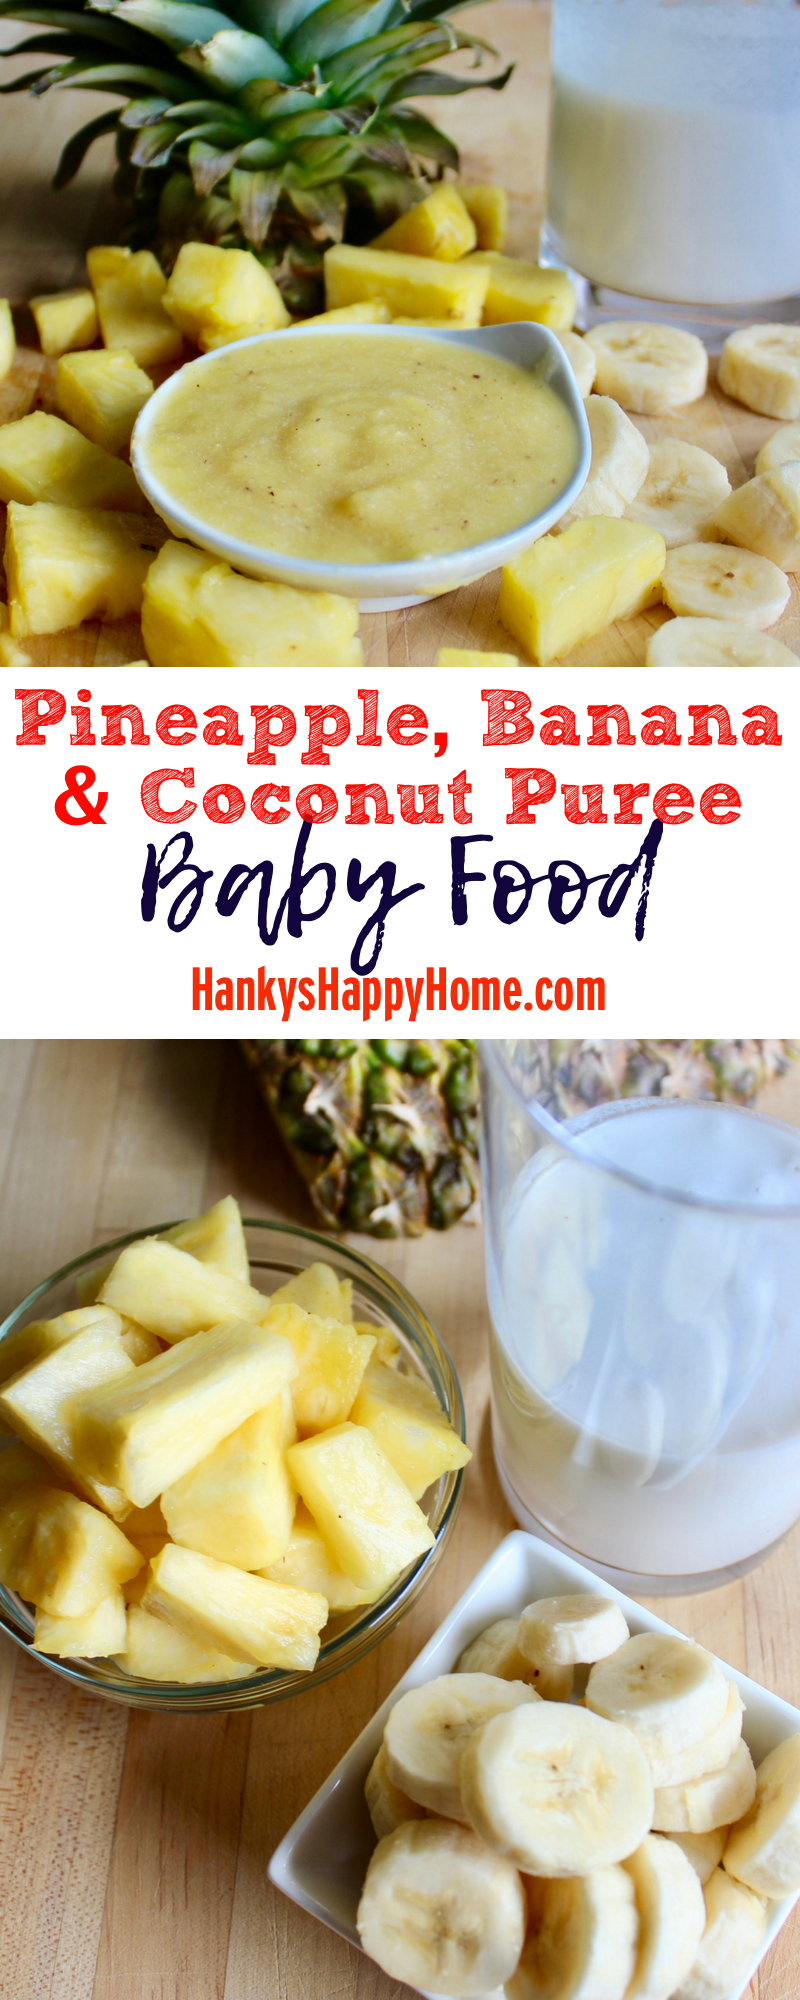 This quick and easy Pineapple, Banana & Coconut Puree tastes like summer and requires no cooking whatsoever.